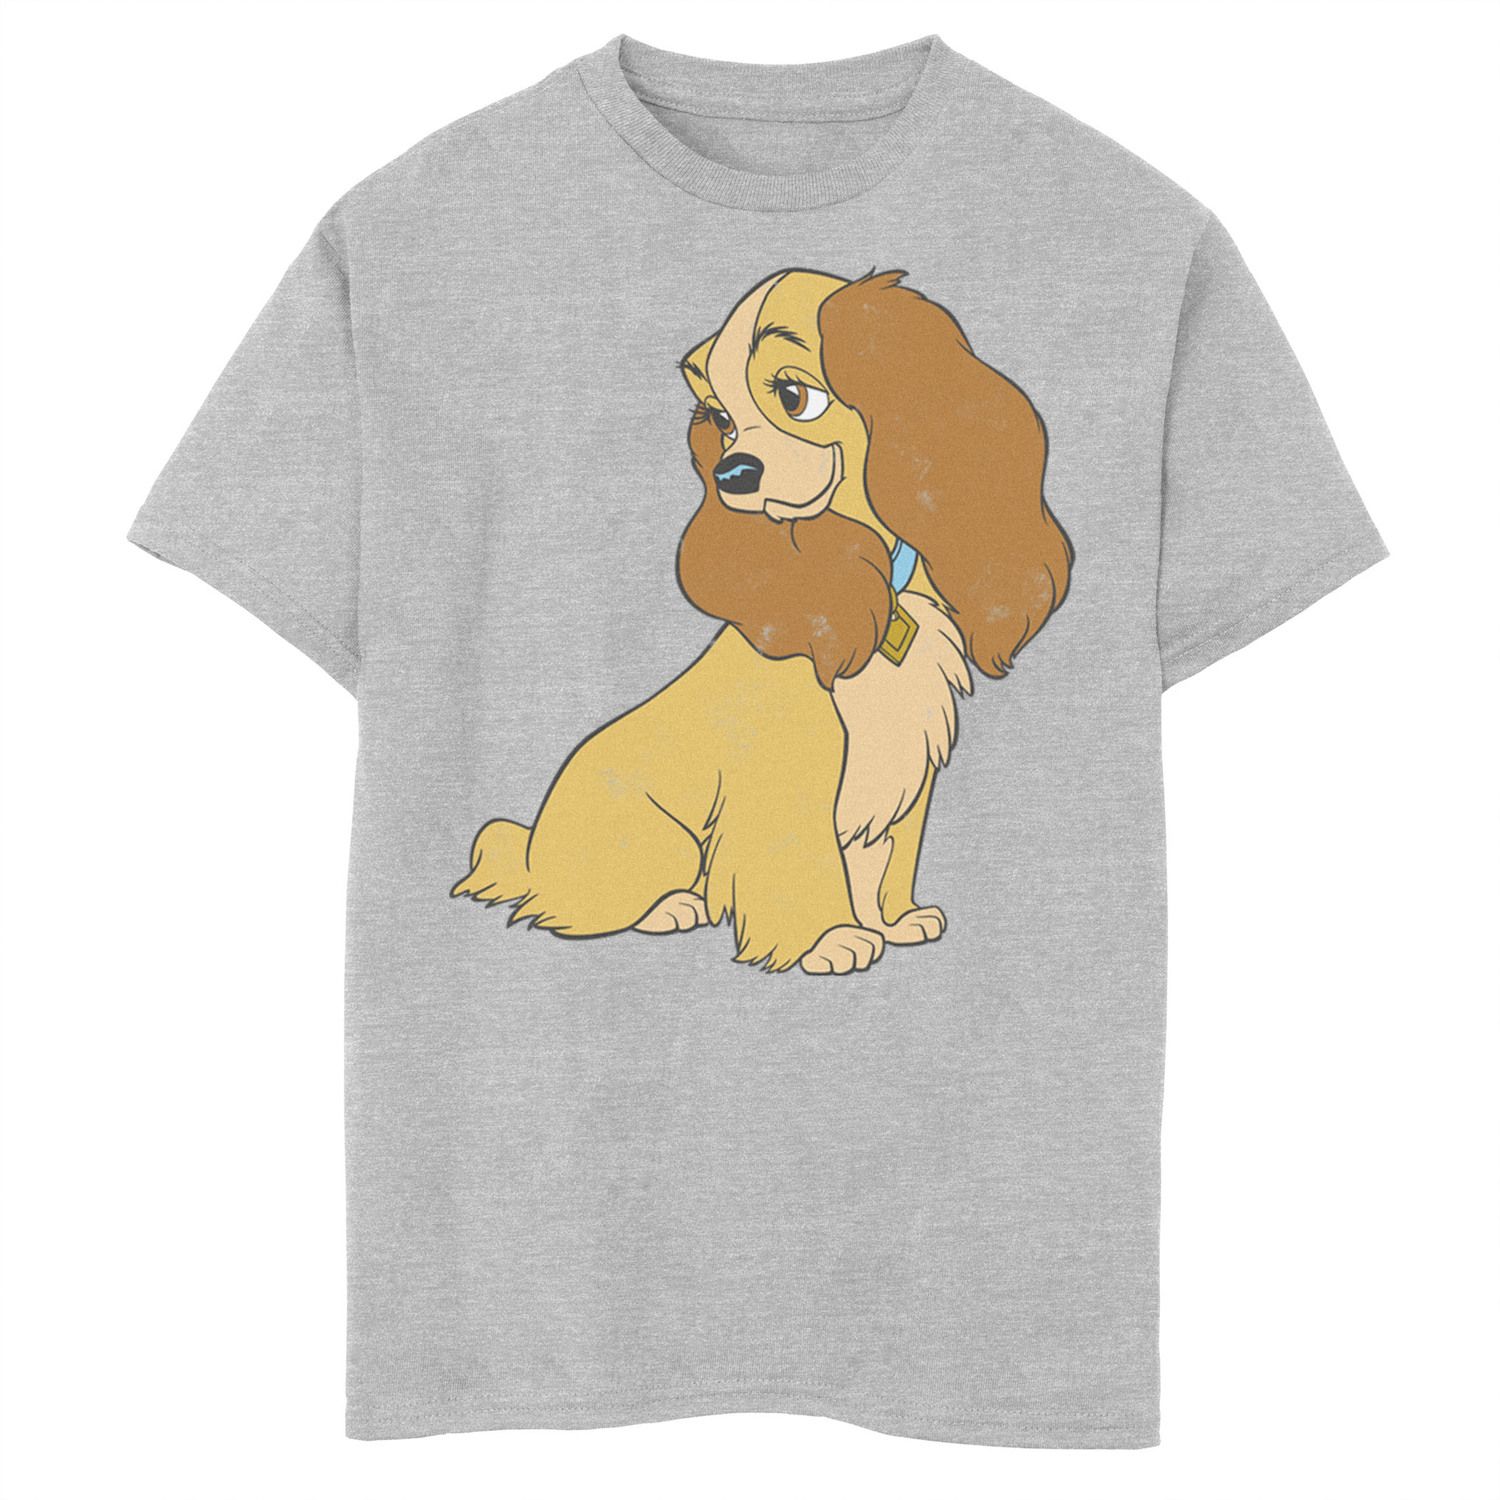 Image for Disney s Lady & The Tramp Boys 8-20 Lady Simple Portrait Graphic Tee at Kohl's.